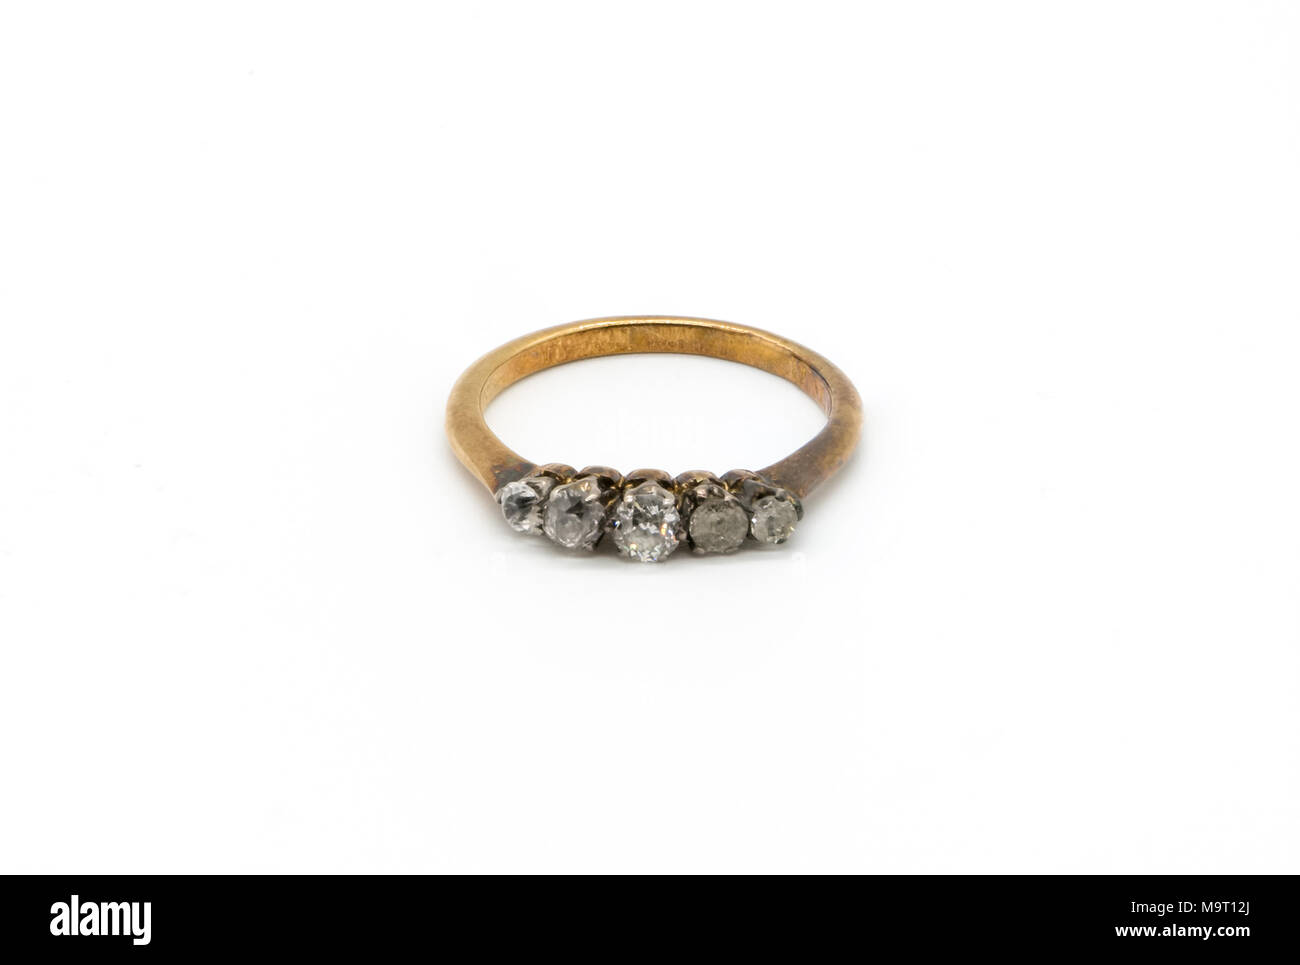 How A Misshapen 1930s Ring Is Professionally Restored | Refurbished -  YouTube